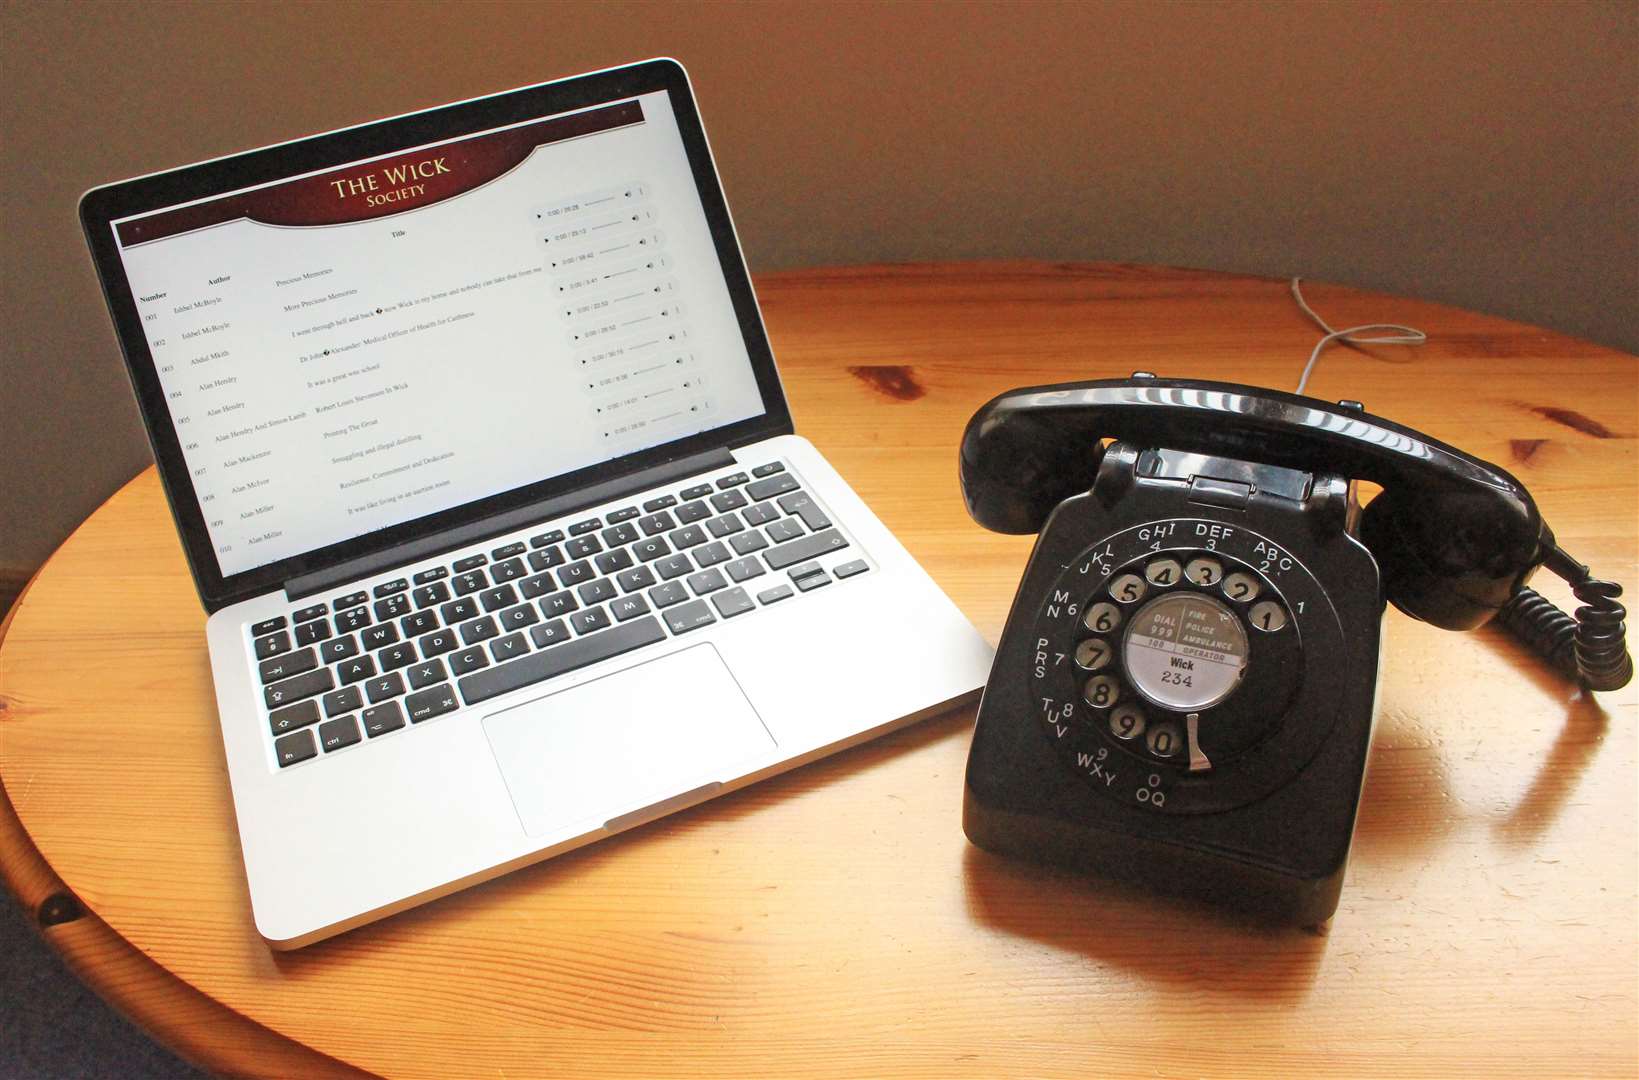 The repurposed 1960s GPO telephone will enhance Wick Voices' outreach activities.